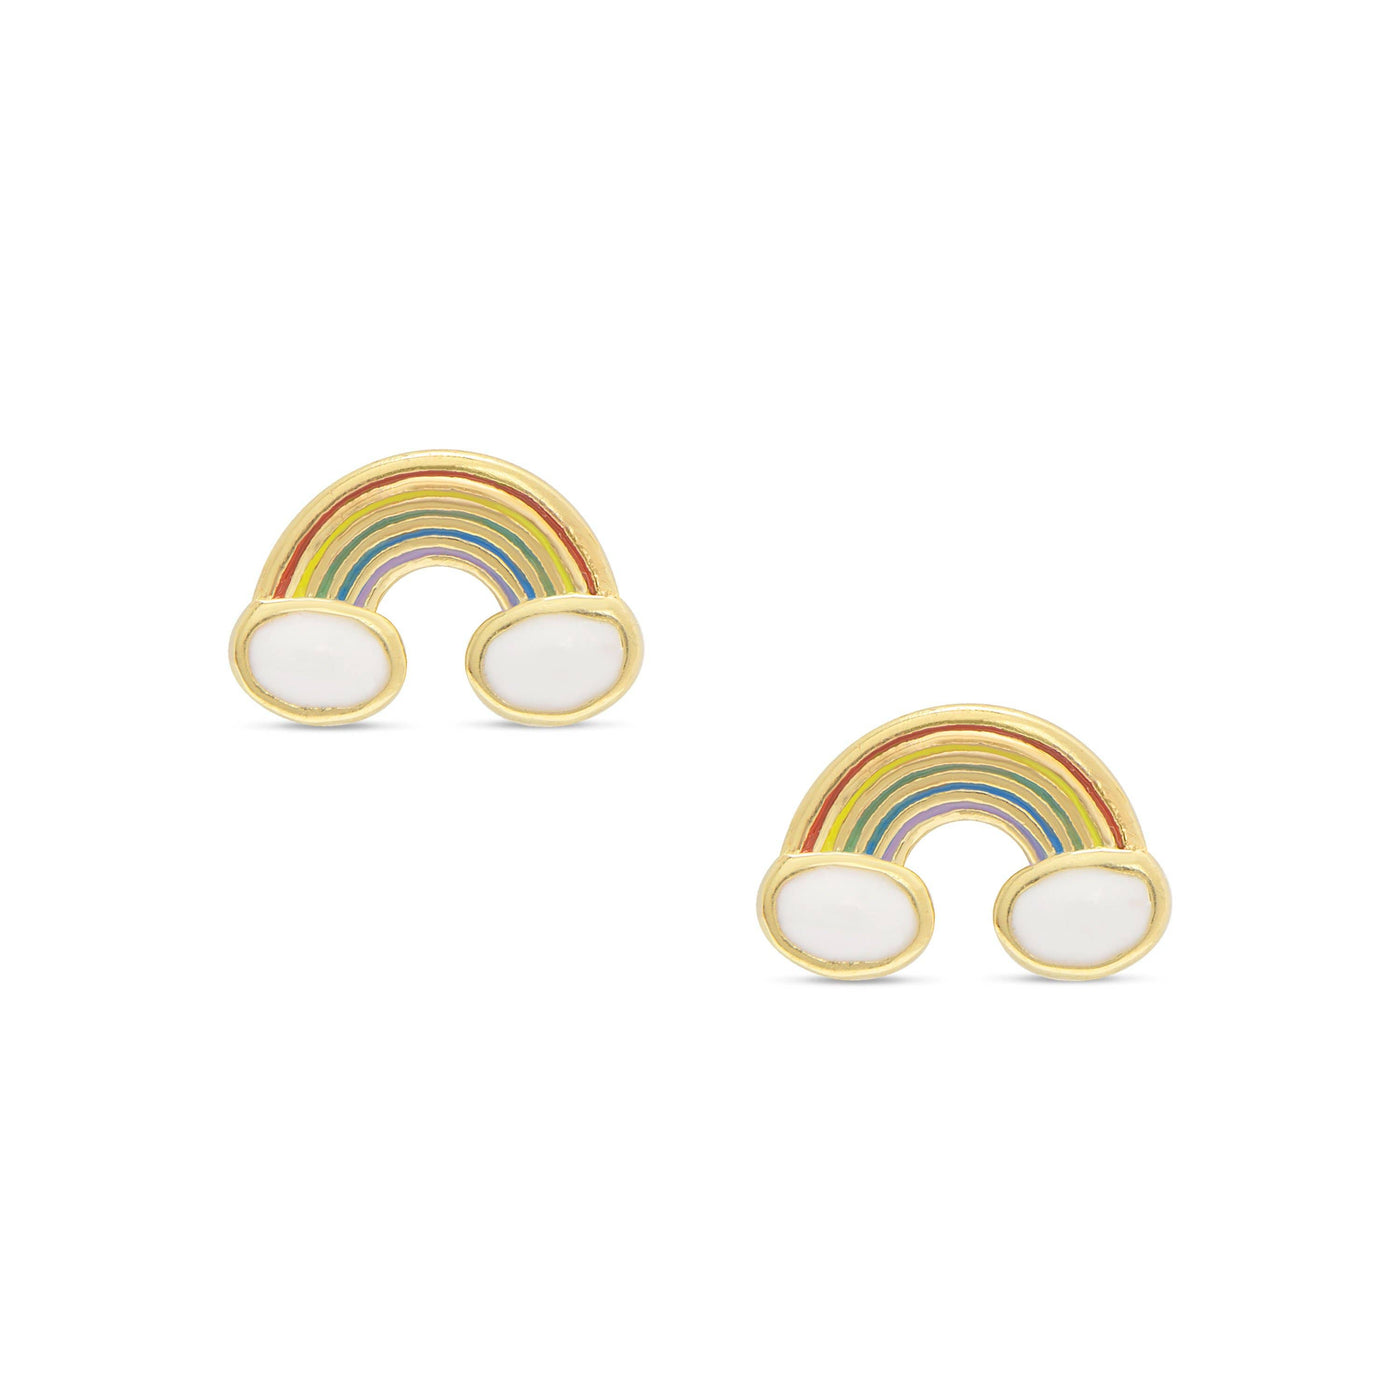 Lily Nily - Rainbow Stud Earrings in Sterling Silver